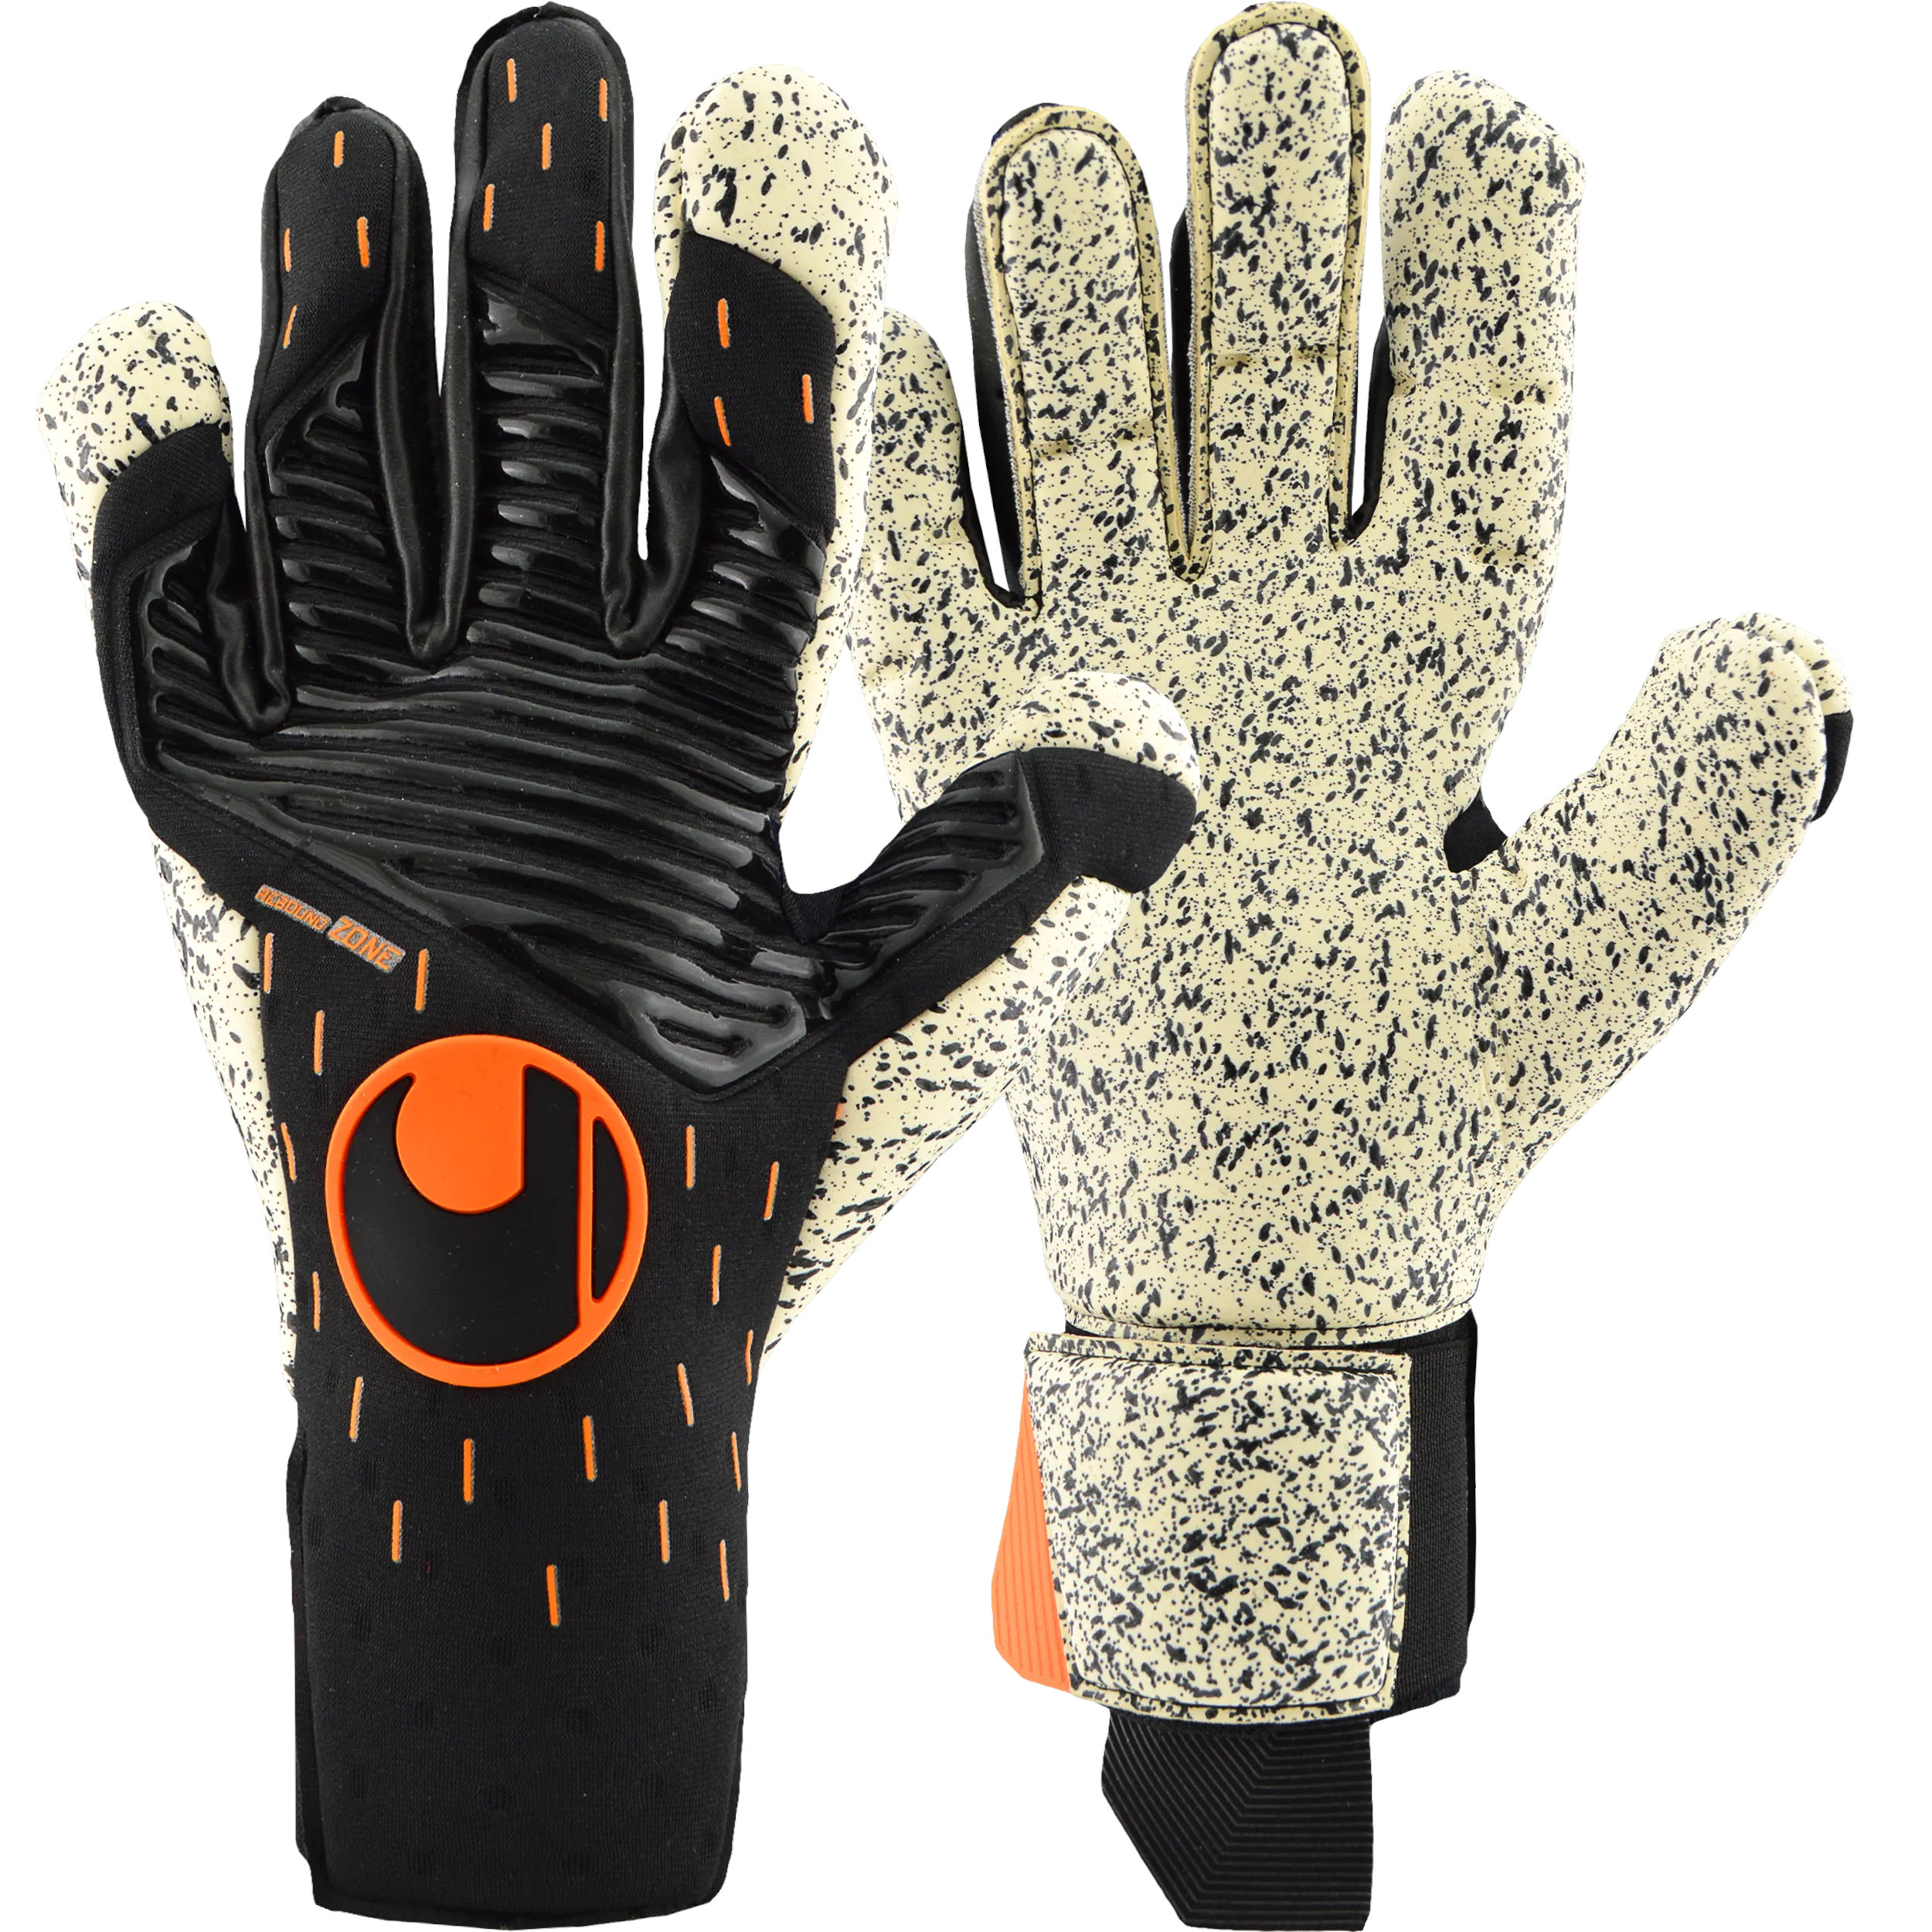 Goalkeeper's gloves Uhlsport Supergrip+ Speed Contact RC